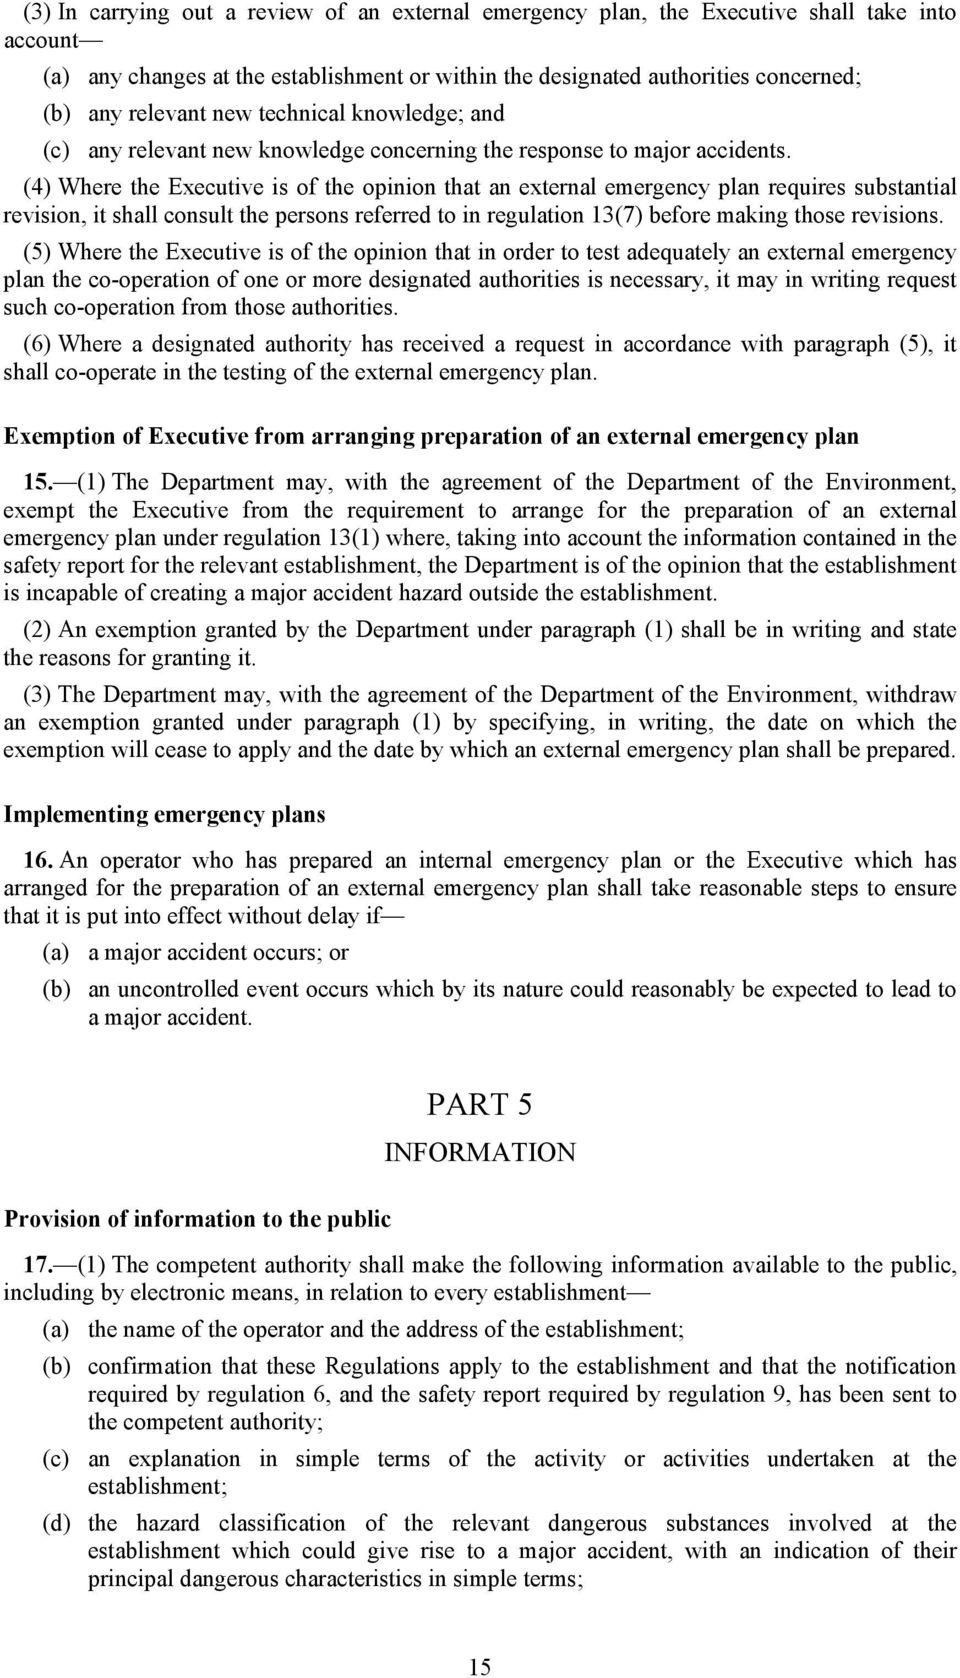 (4) Where the Executive is of the opinion that an external emergency plan requires substantial revision, it shall consult the persons referred to in regulation 13(7) before making those revisions.